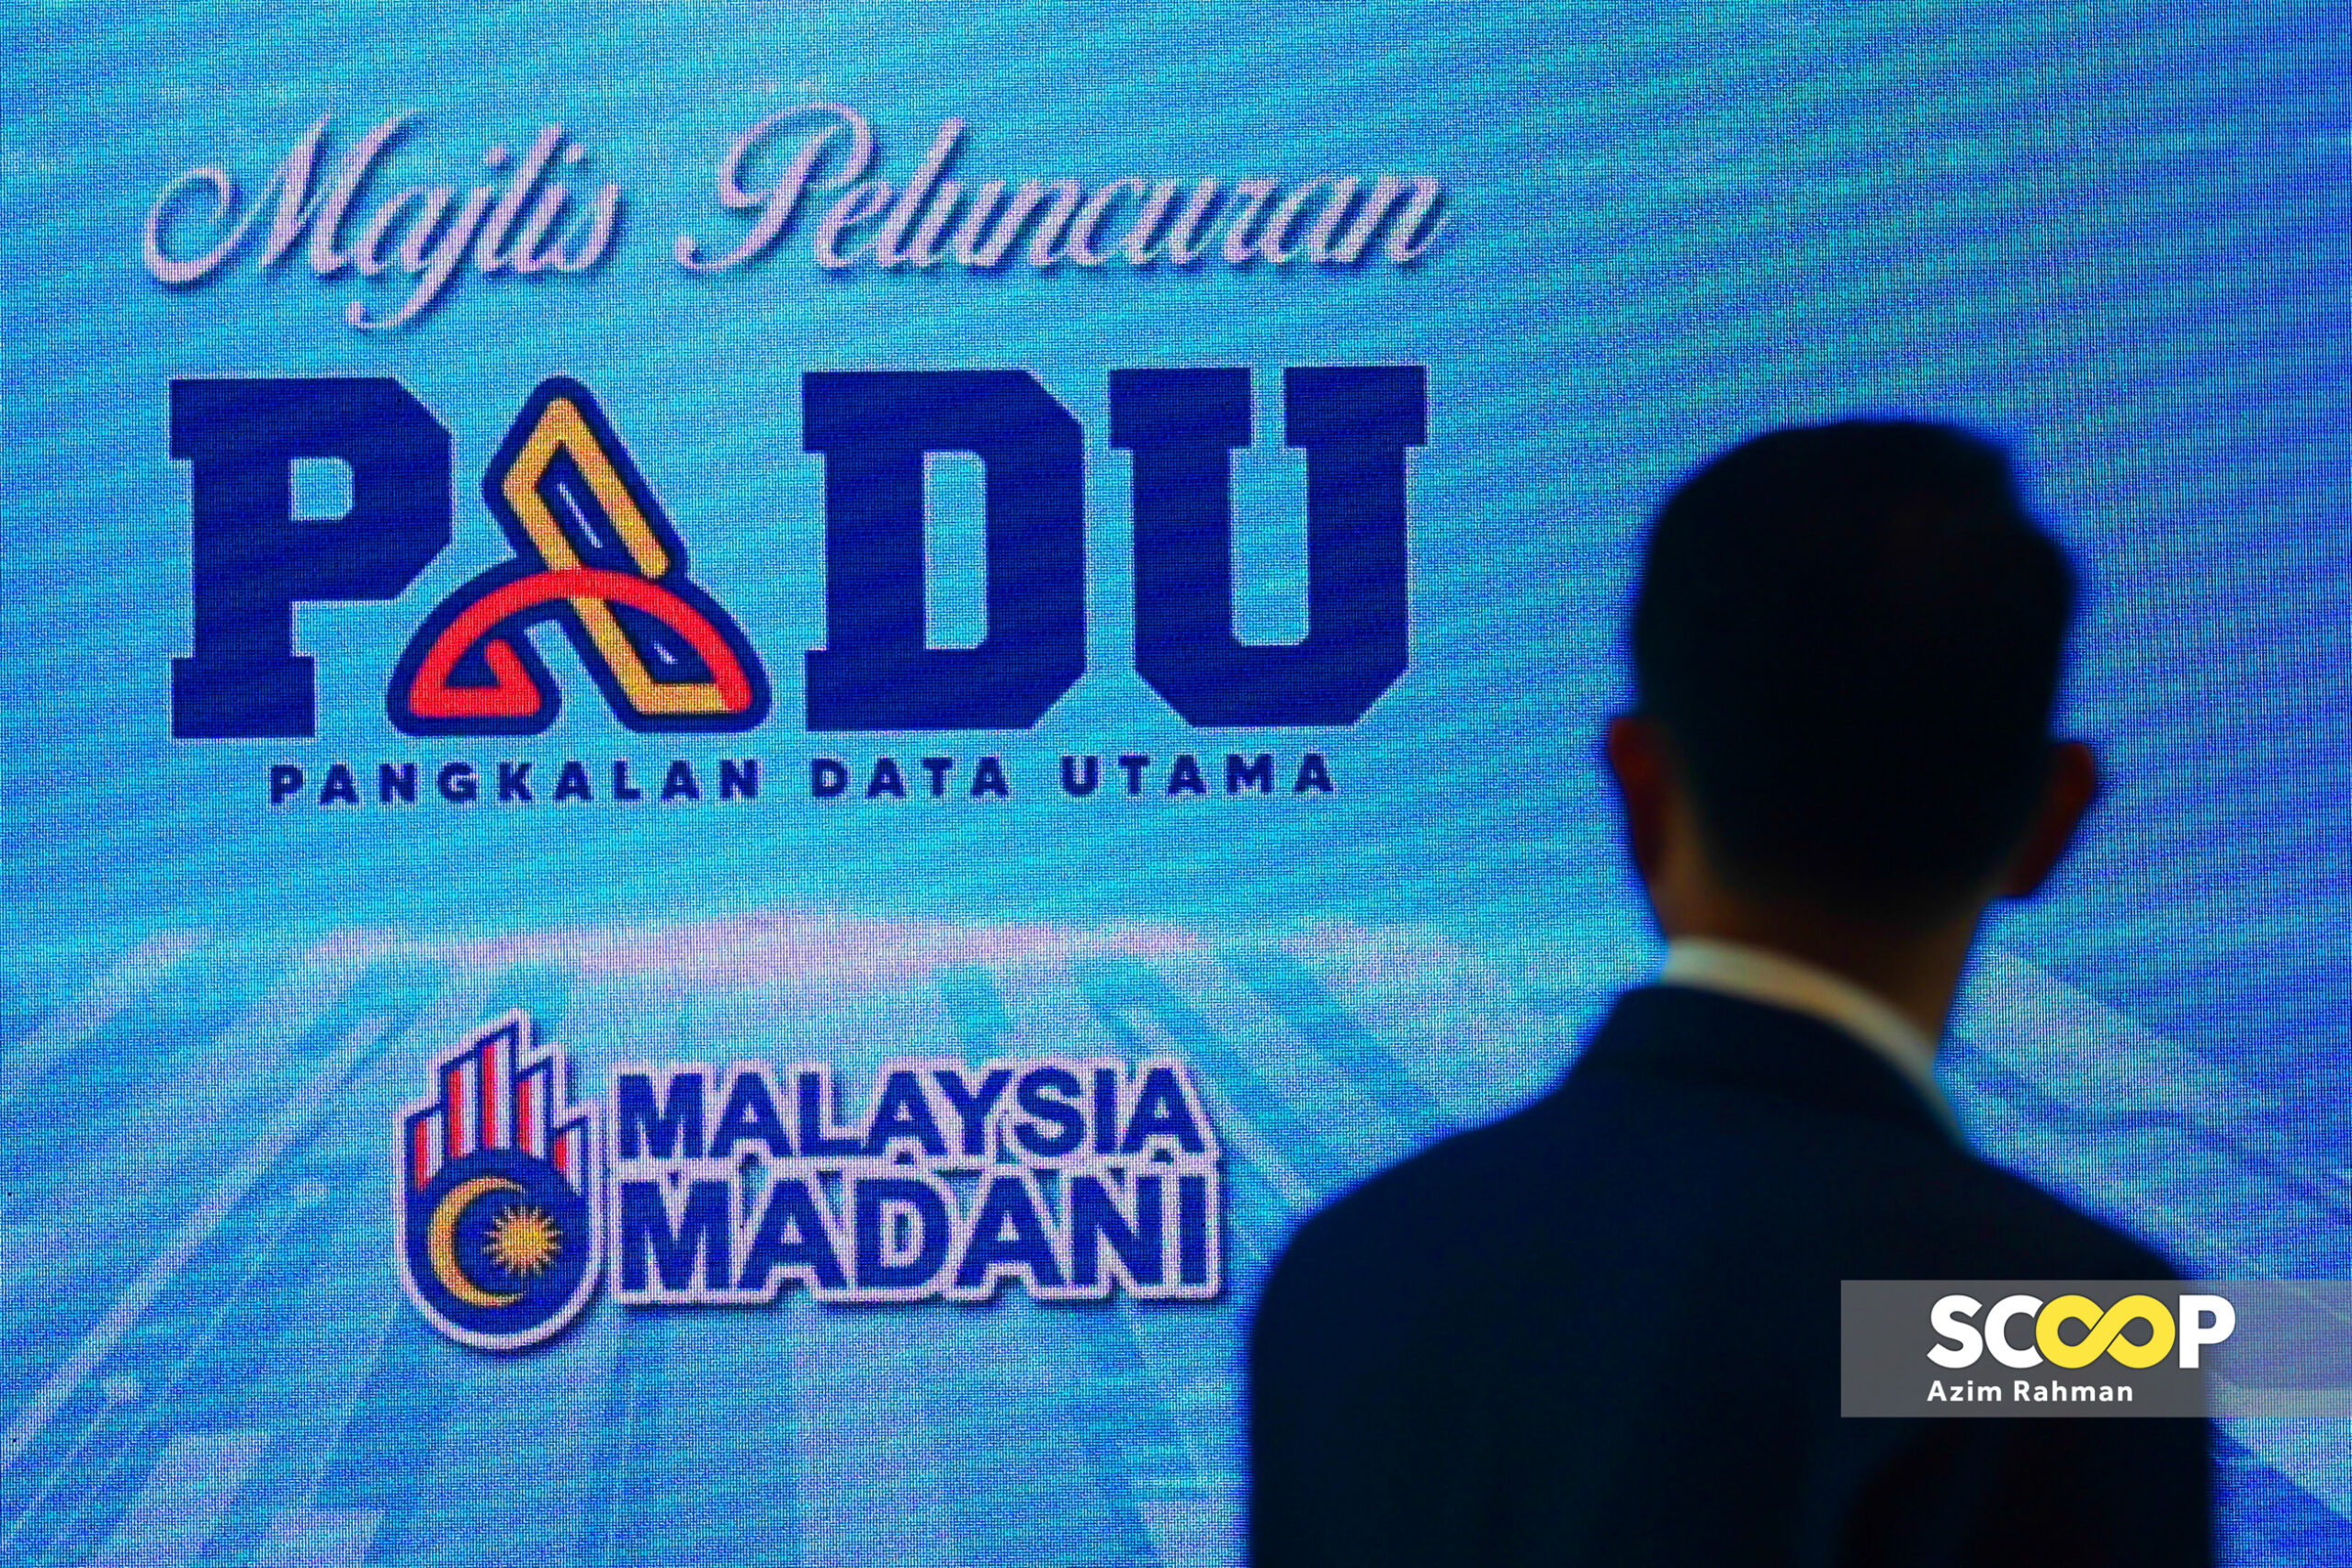 Lawyers for Liberty raises alarm over ‘loophole’ in Padu system